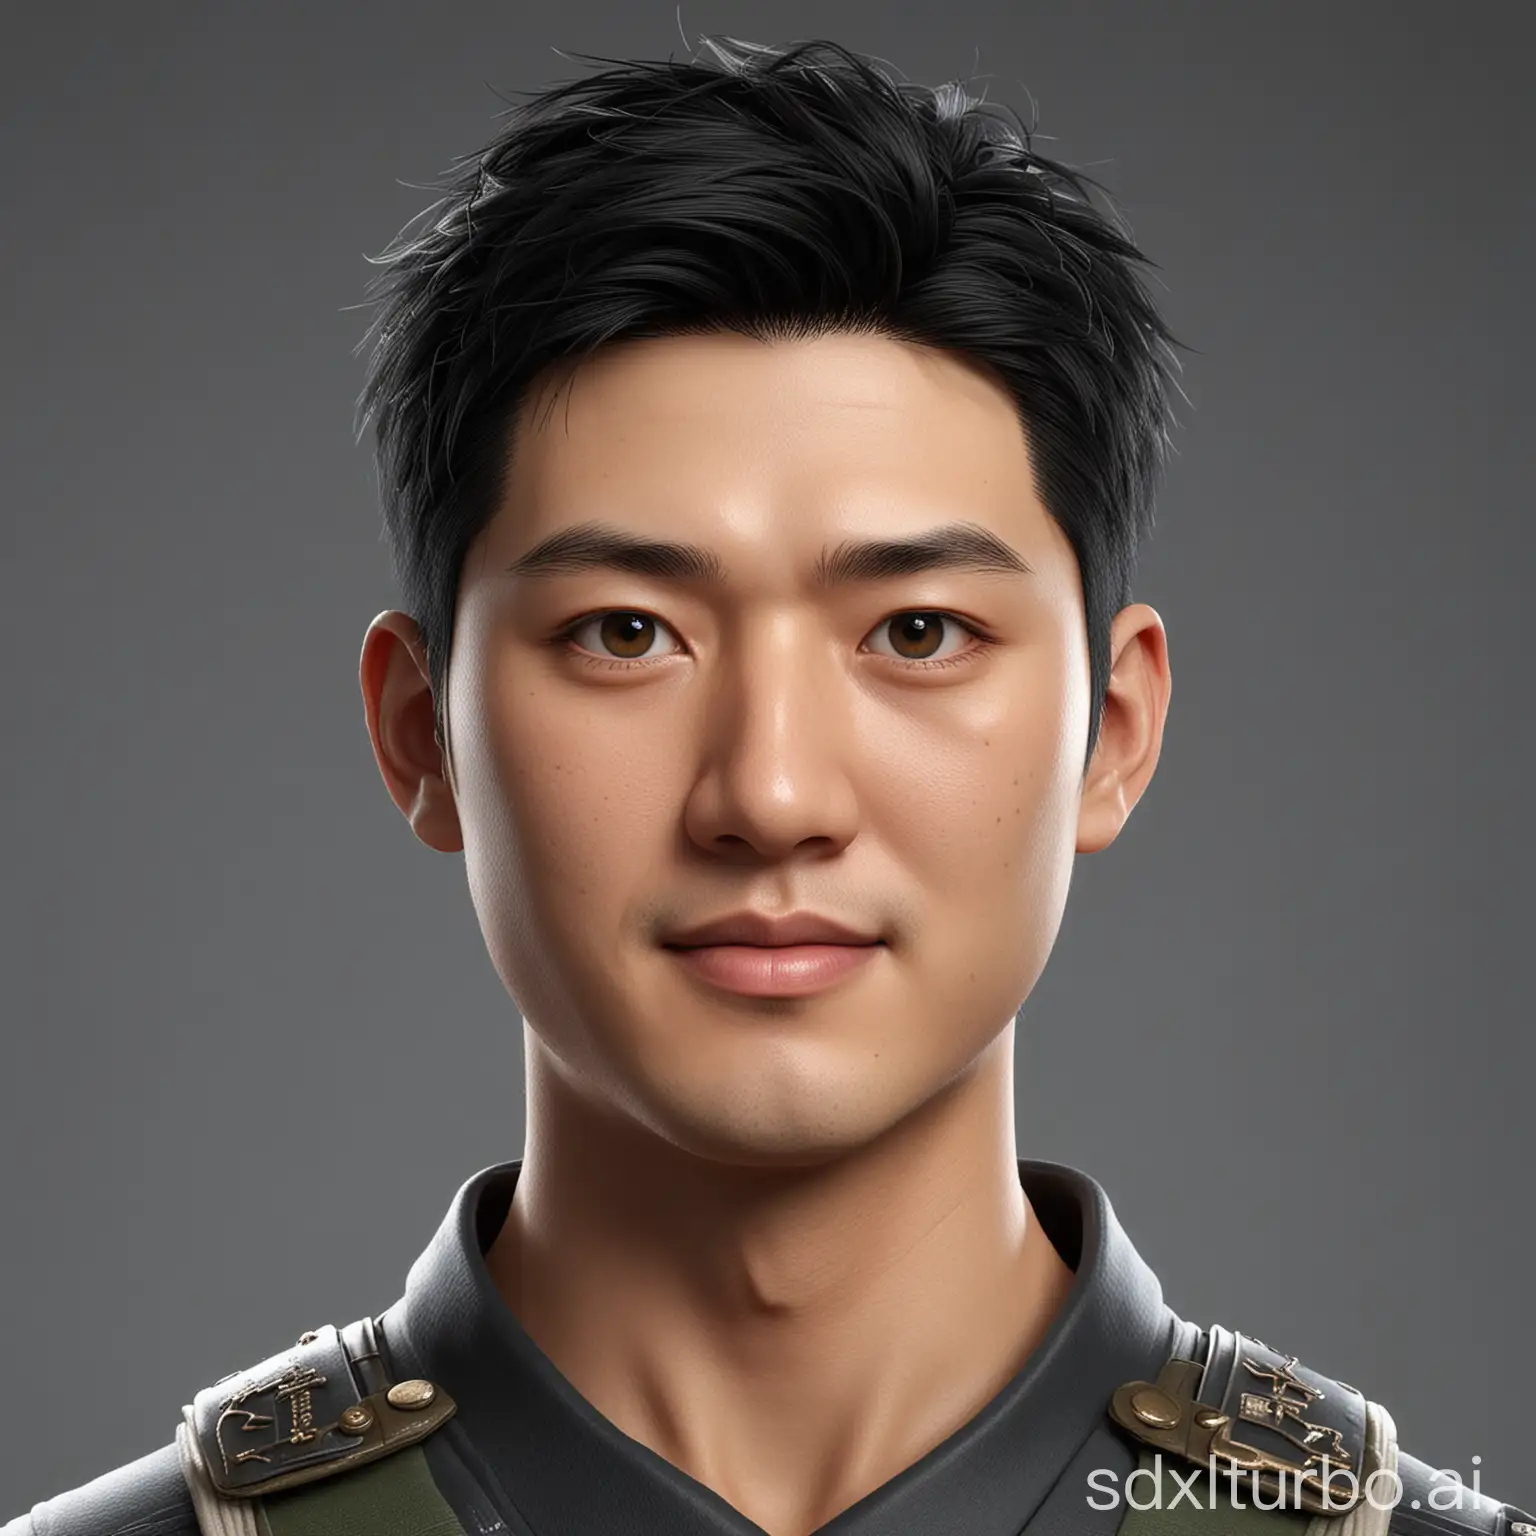 Create a full 3D cartoon style body with a big head. 30 year old japanese man, clean face. Ideal height, square face shape. handsome, his eyes are slightly round, his skin is pure white, his smile is thin and sweet. black hair, wearing a military samurai cyborg uniform with its emblem. Body position is clearly visible. The background is a solid white neutral color. Use soft photography lighting, hair lighting, top lighting, side lighting. Highest quality photos, Uhd,16k